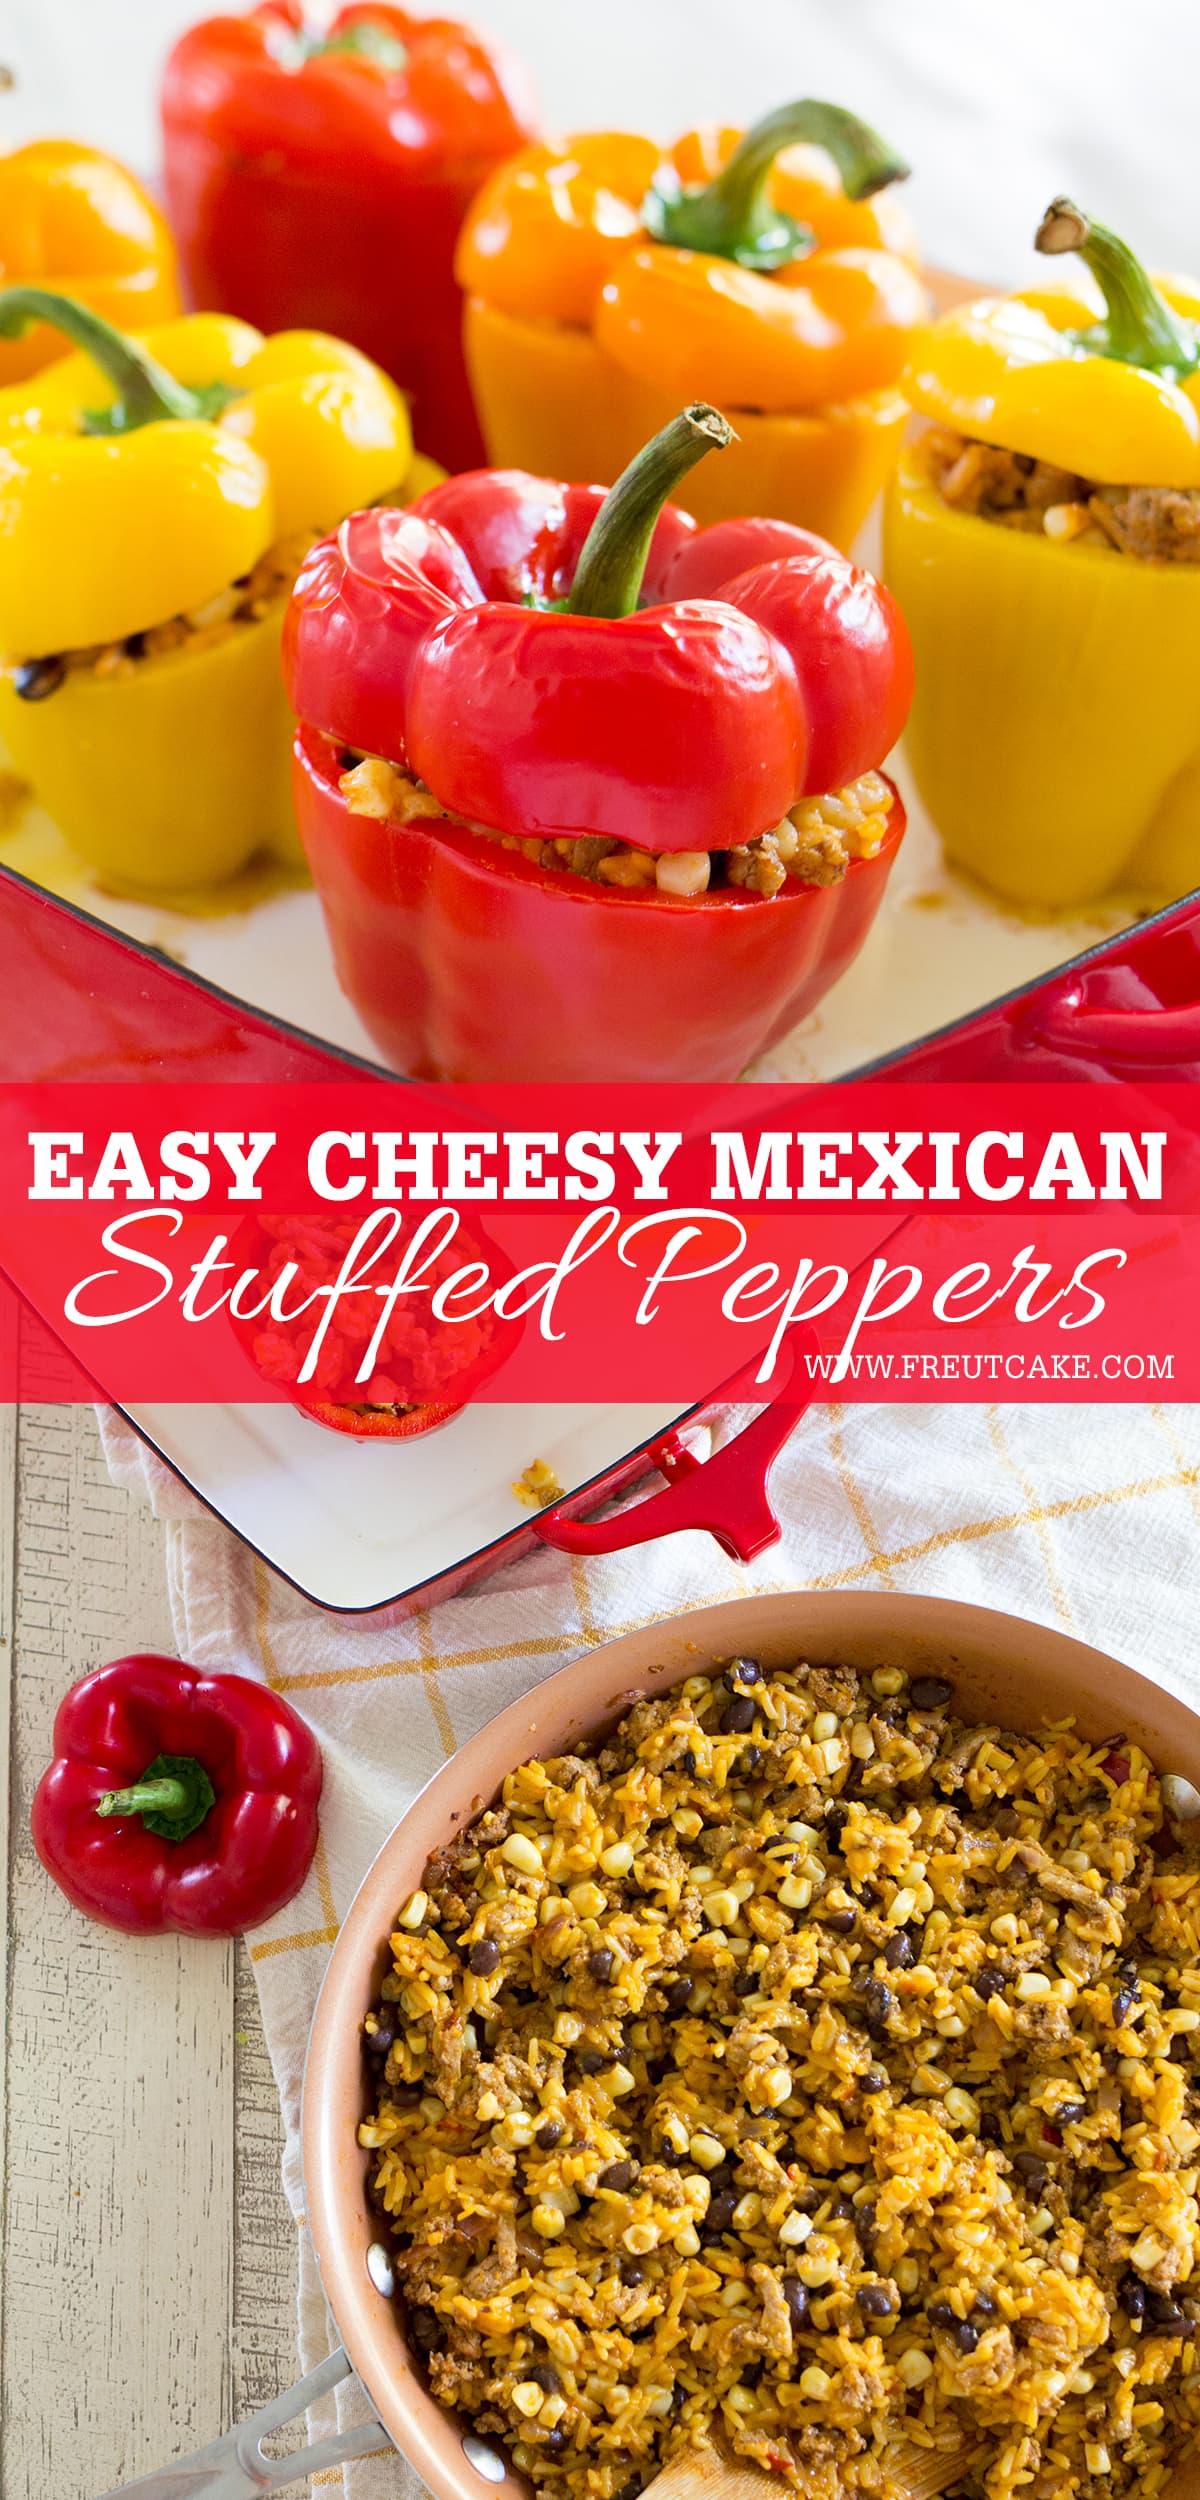 Easy Mexican Stuffed Peppers with Turkey and Rice also known as the best stuffed pepper recipe